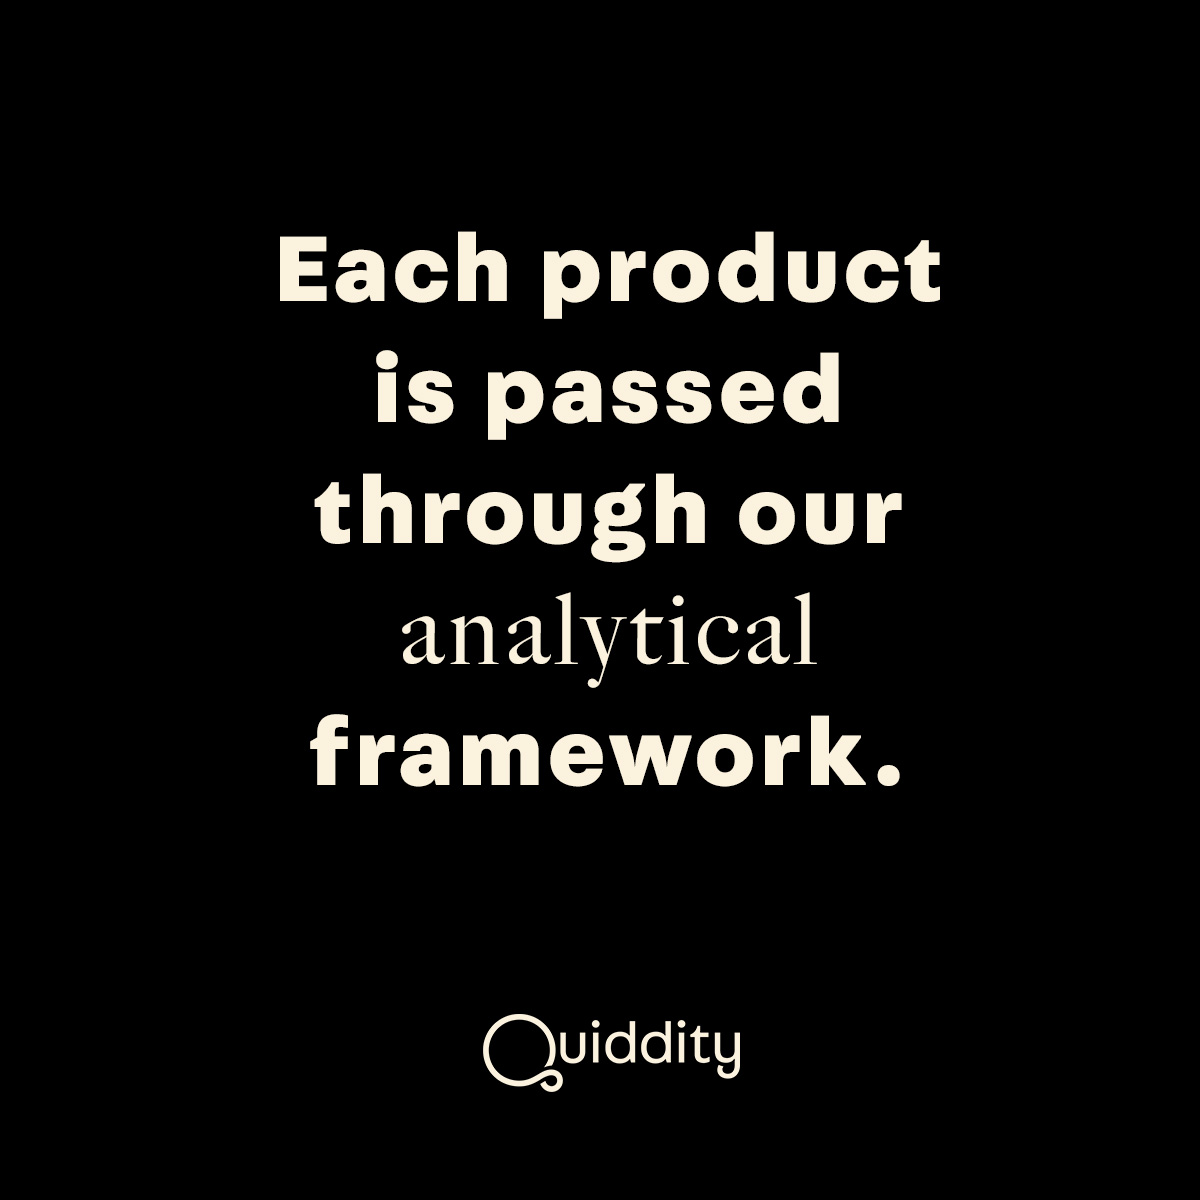 Quiddity_Social_0003_Each product is passed through our analytical framework..jpg